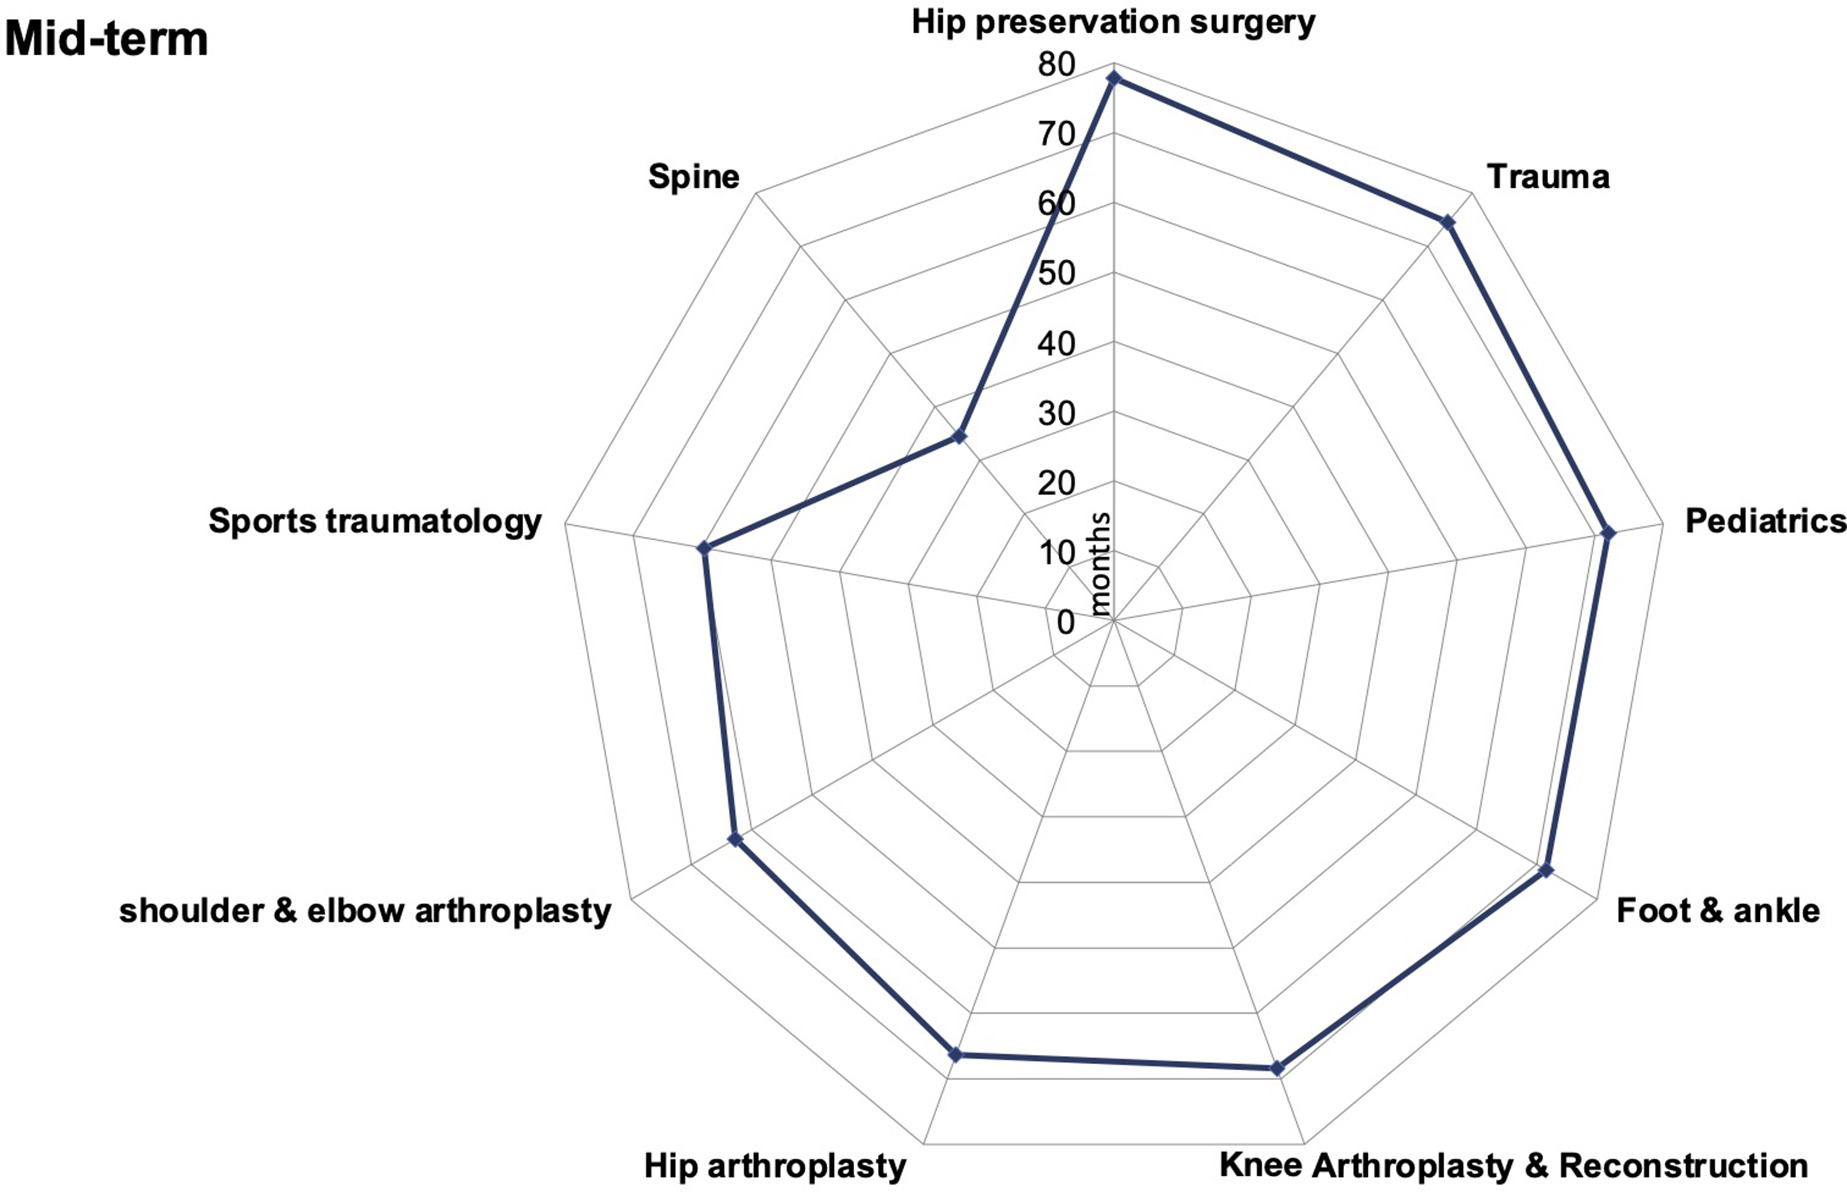 Fig. 7 
            Follow-up intervals defined as mid-term for different orthopaedic subspecialties.
          